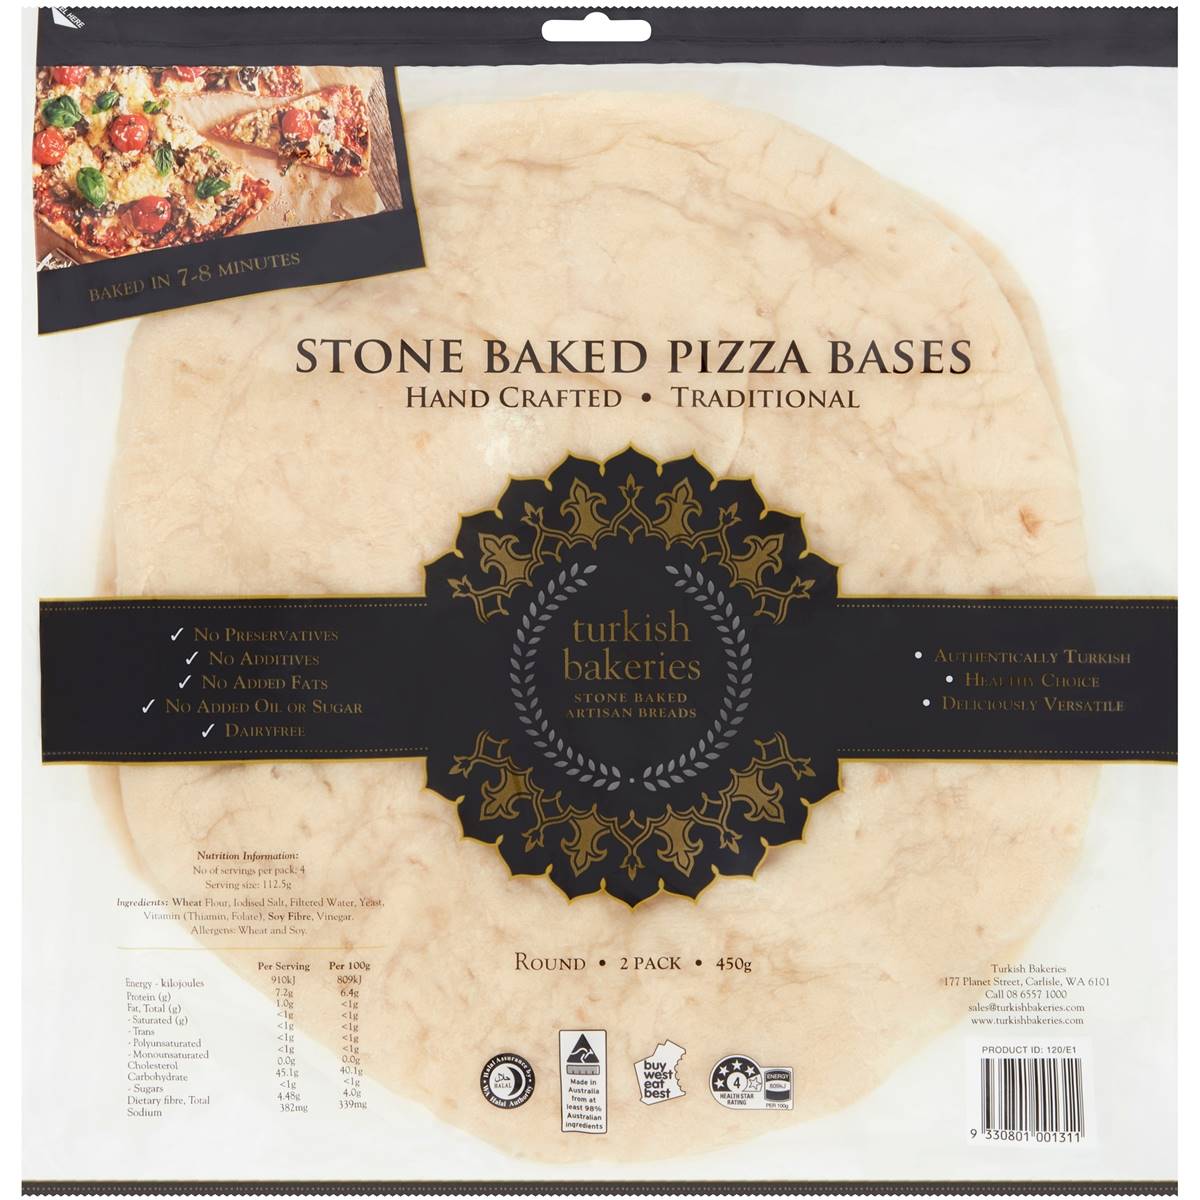 Calories in Turkish Bakeries Stone Baked Pizza Bases